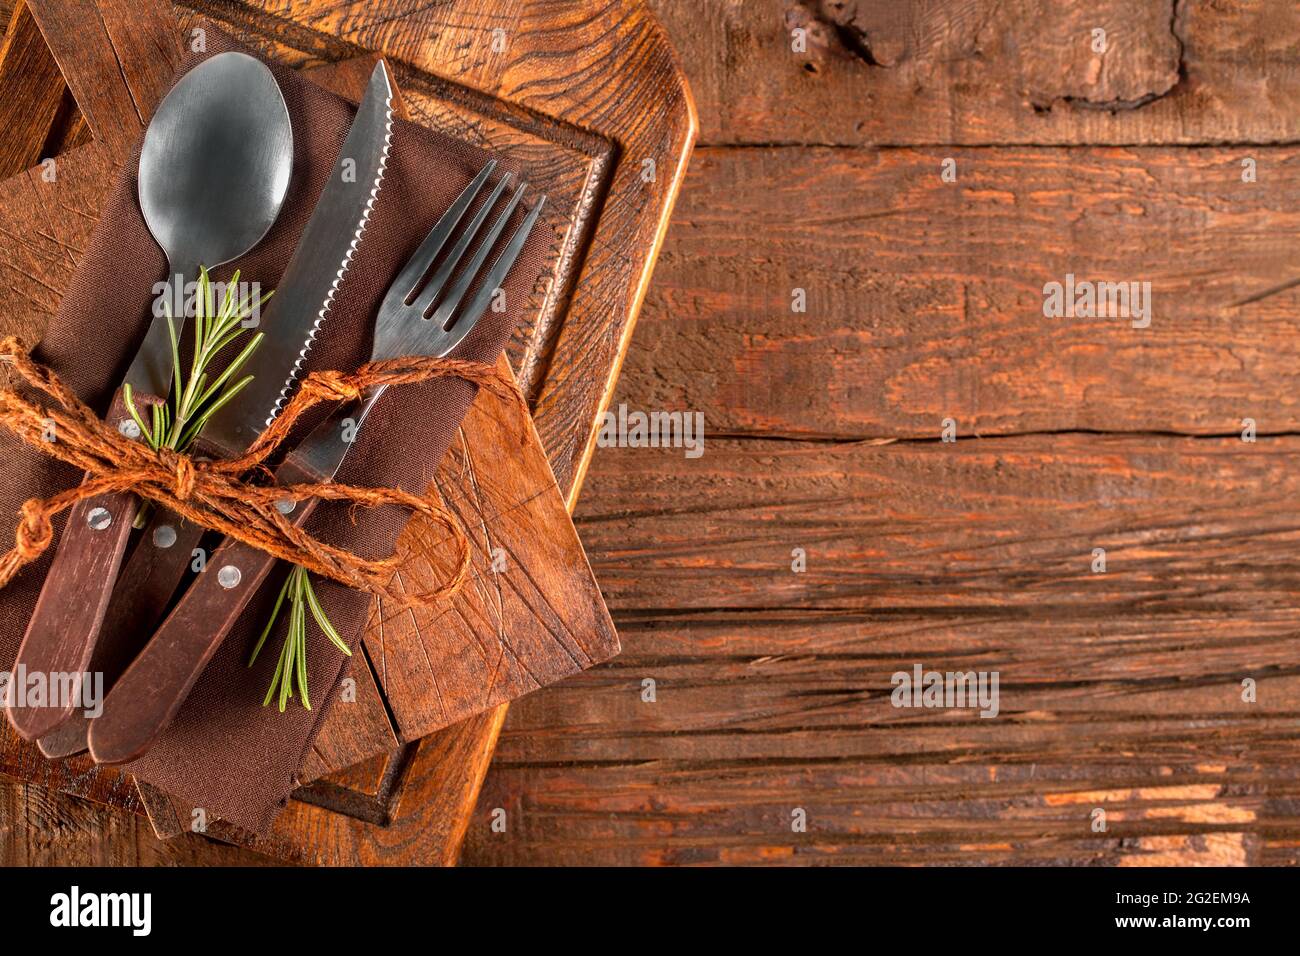 Spoon, fork and knife, restaurant cutlery, on a brown linen napkin, on rustic wooden background Stock Photo